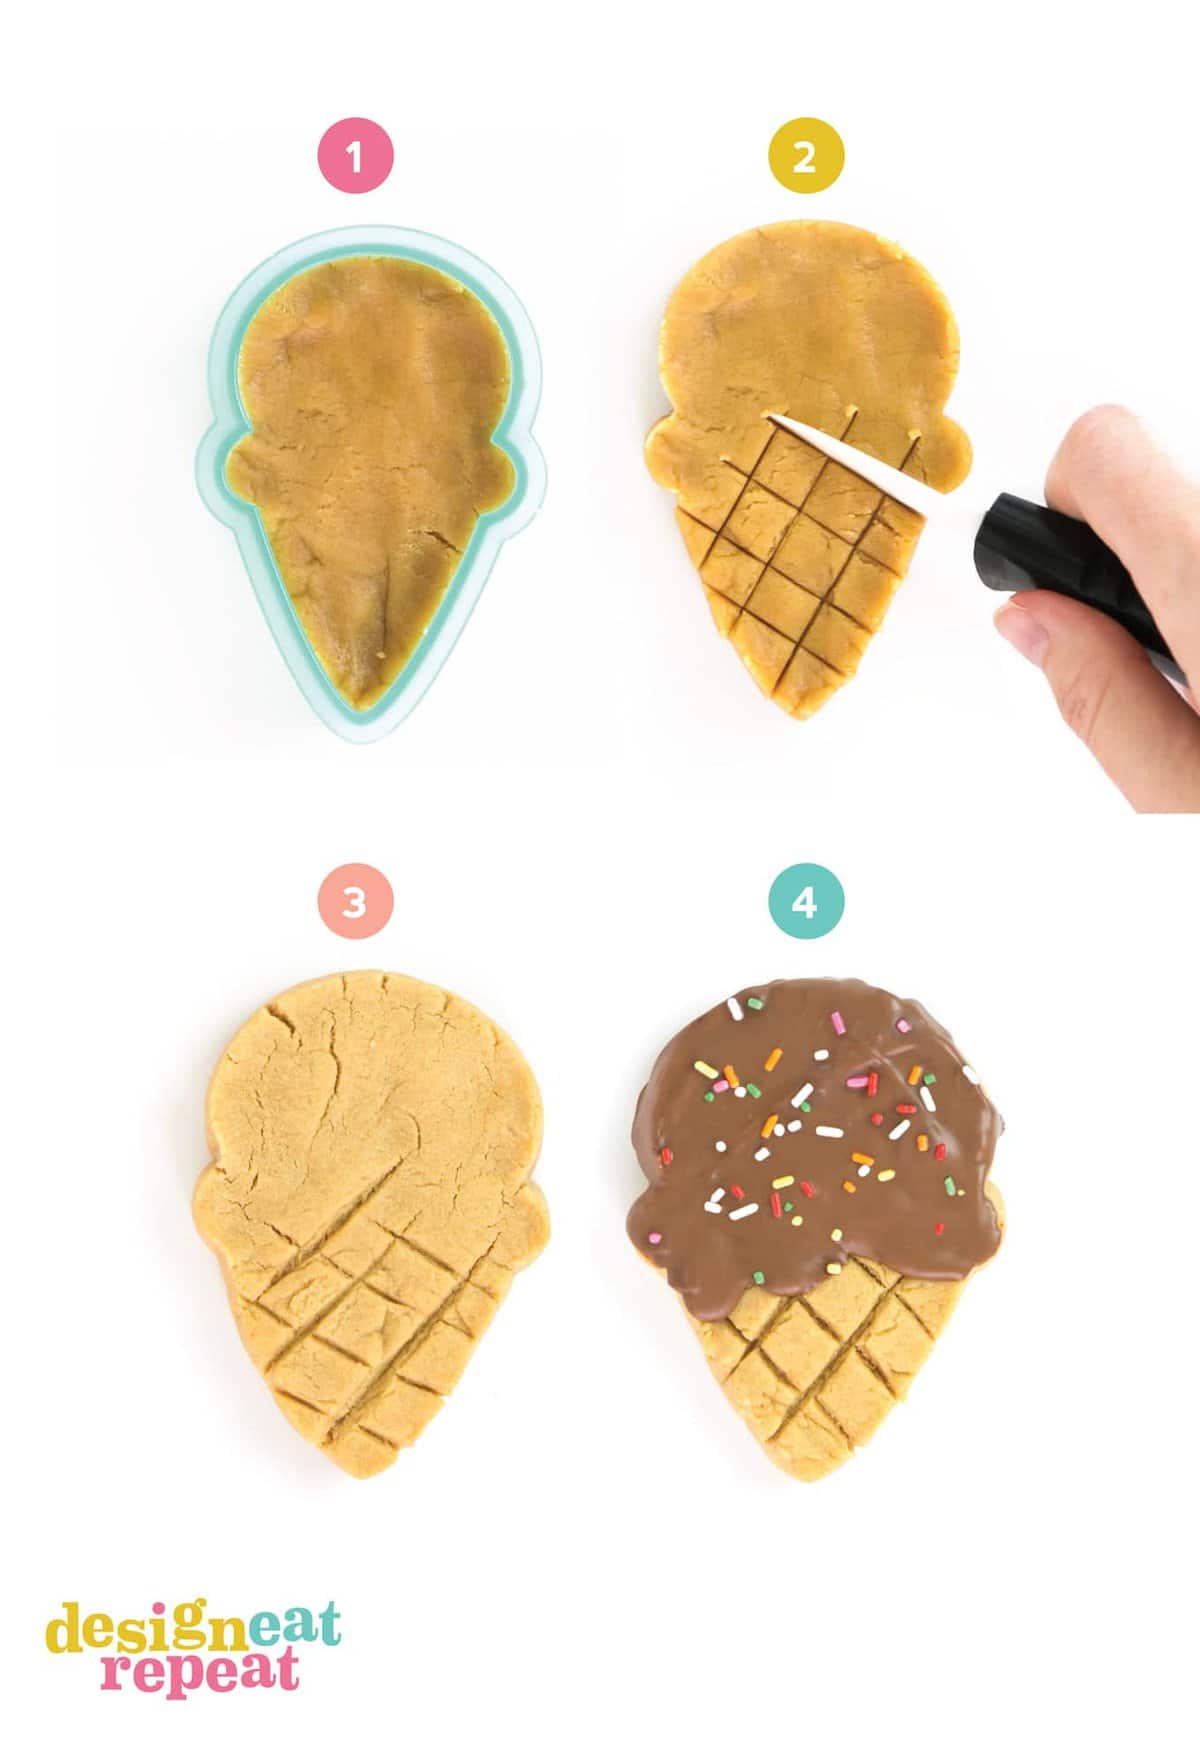 Instructions to make ice cream cone cutters. Hand cutting slits in dough with knife.